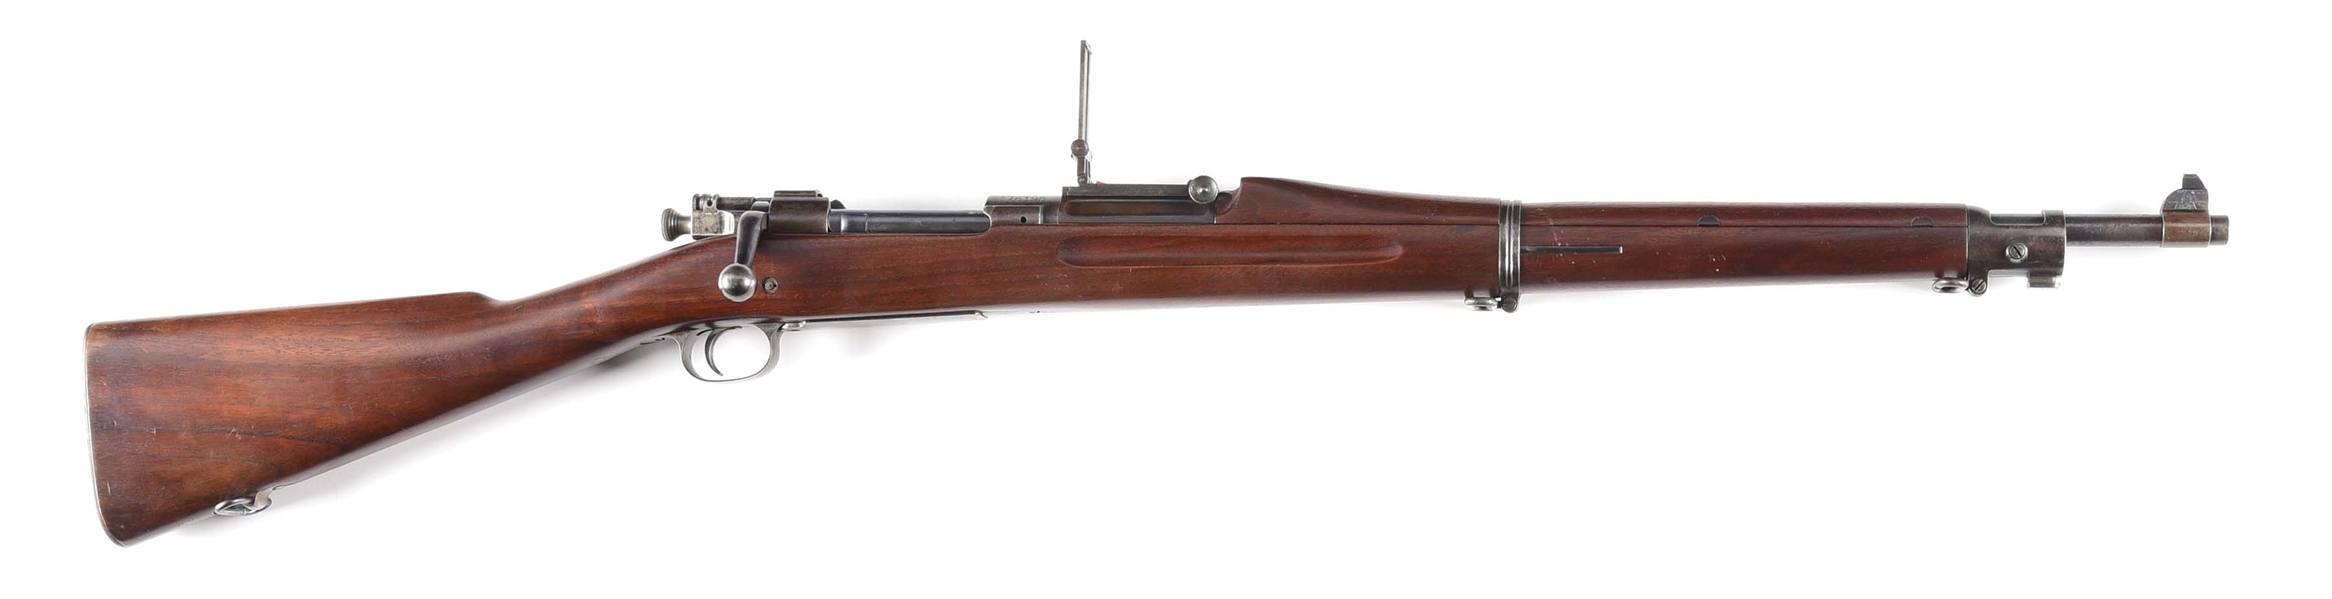 (C) NRA MARKED ROCK ISLAND ARMORY MODEL 1903 BOLT ACTION RIFLE.